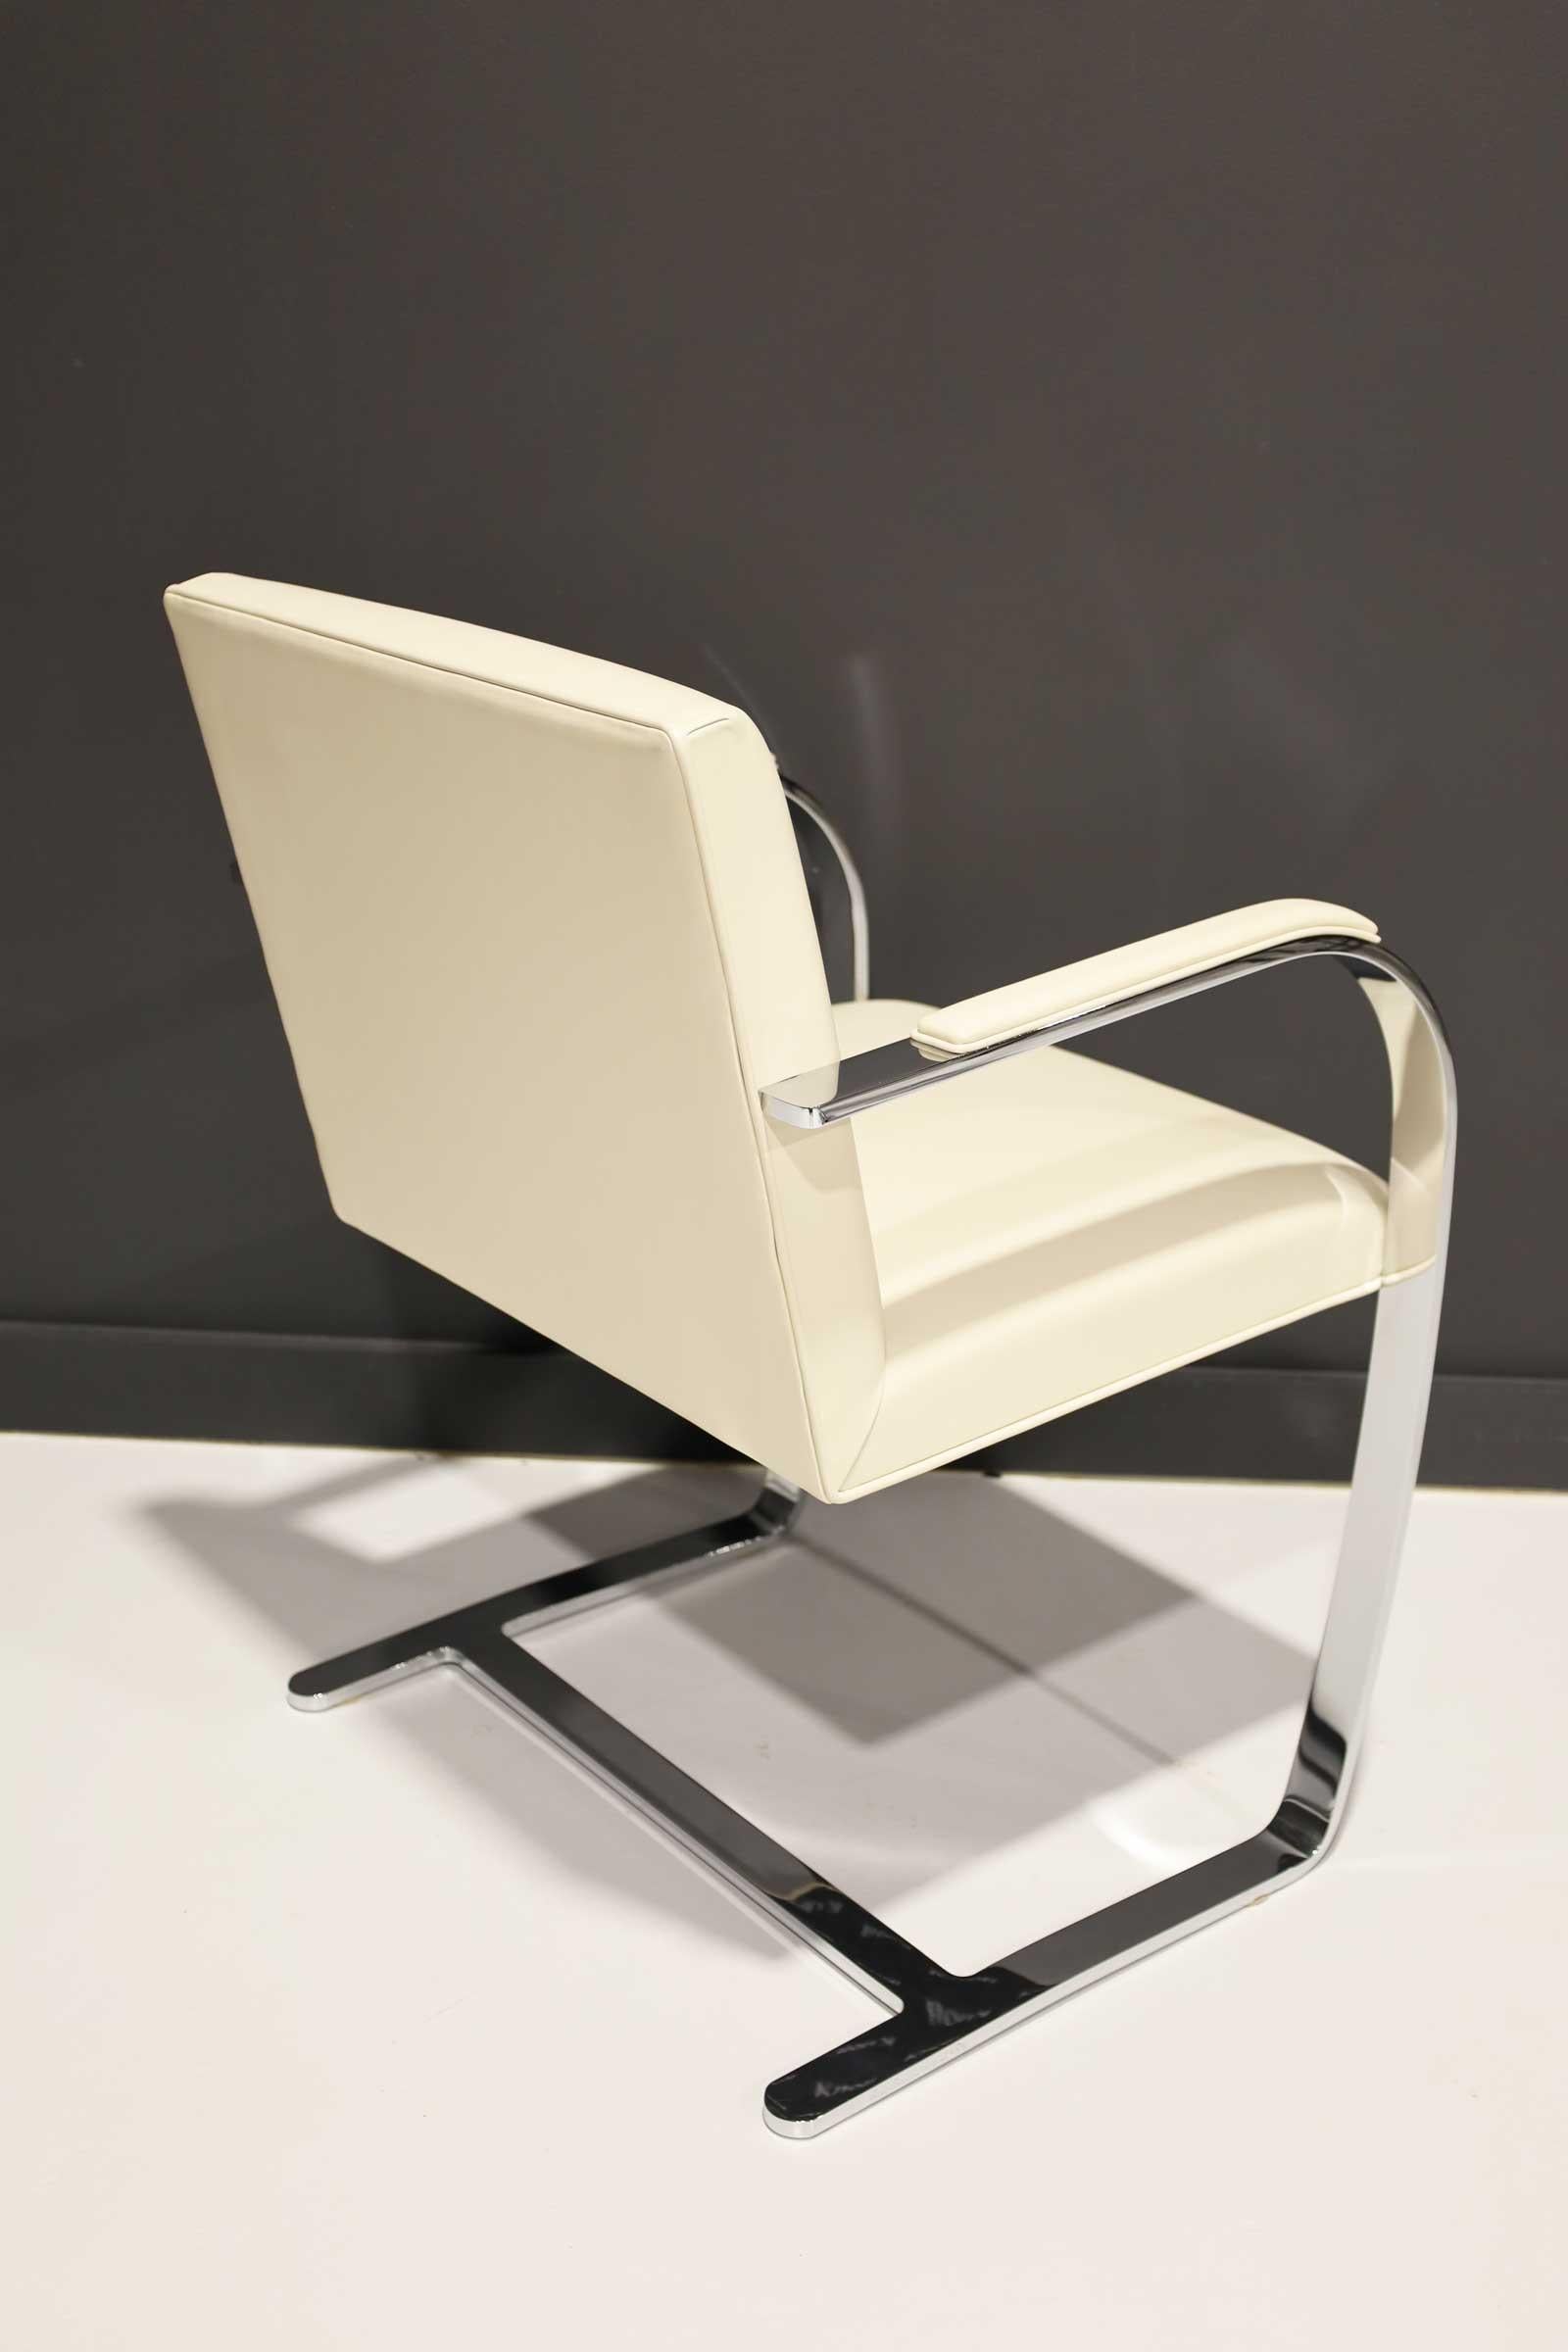 Contemporary Mies van der Rohe Stainless Steel Brno Chairs by Knoll in Sabrina Leather